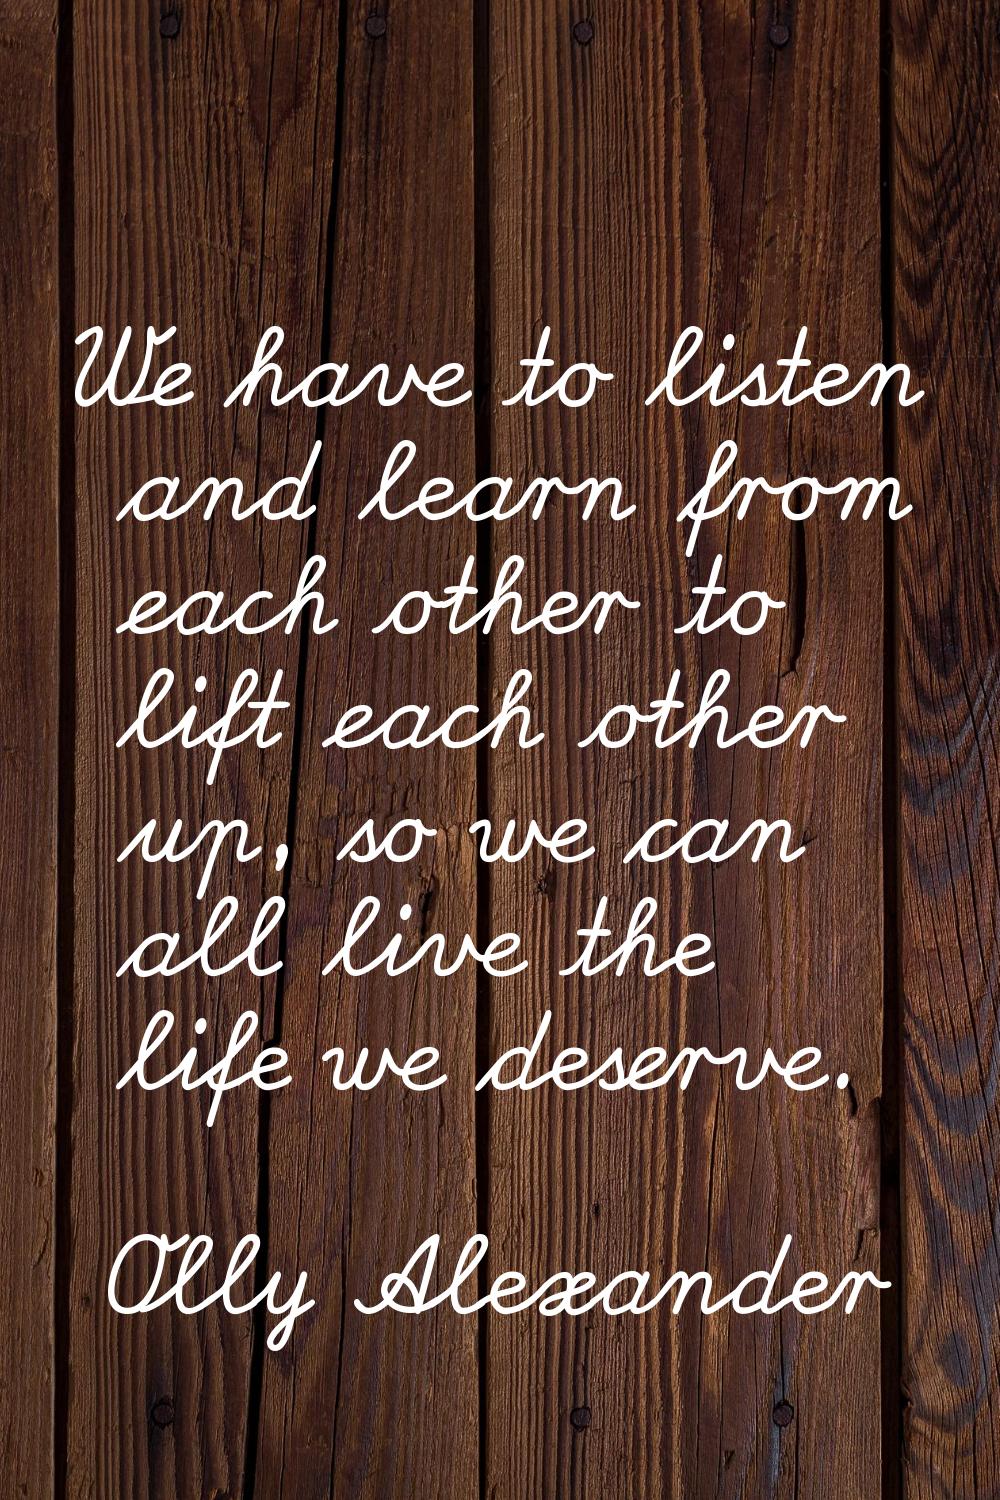 We have to listen and learn from each other to lift each other up, so we can all live the life we d